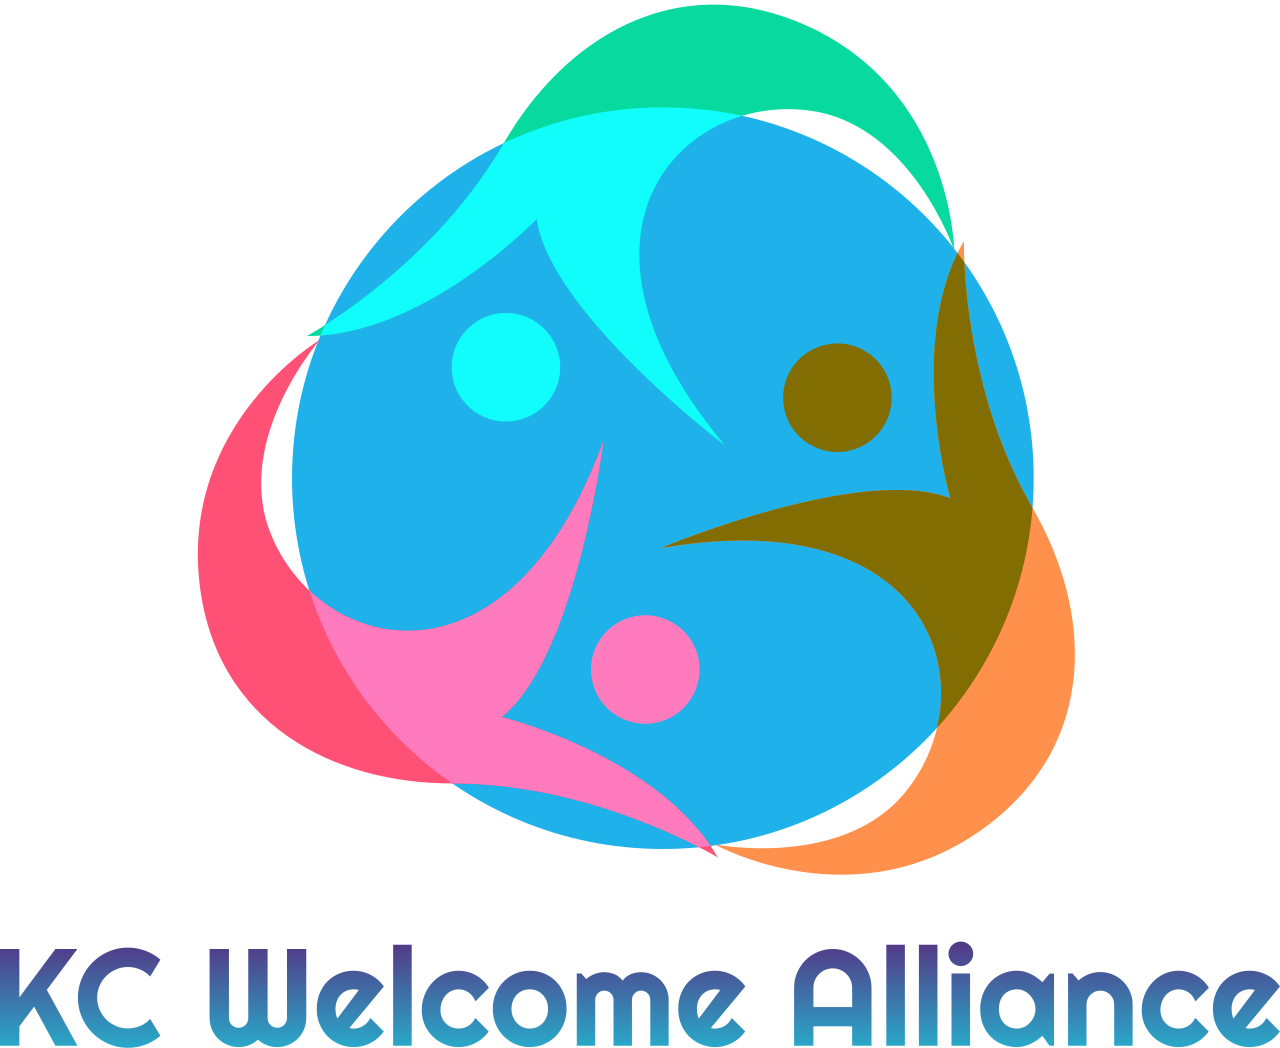 KC Welcome Alliance's web page